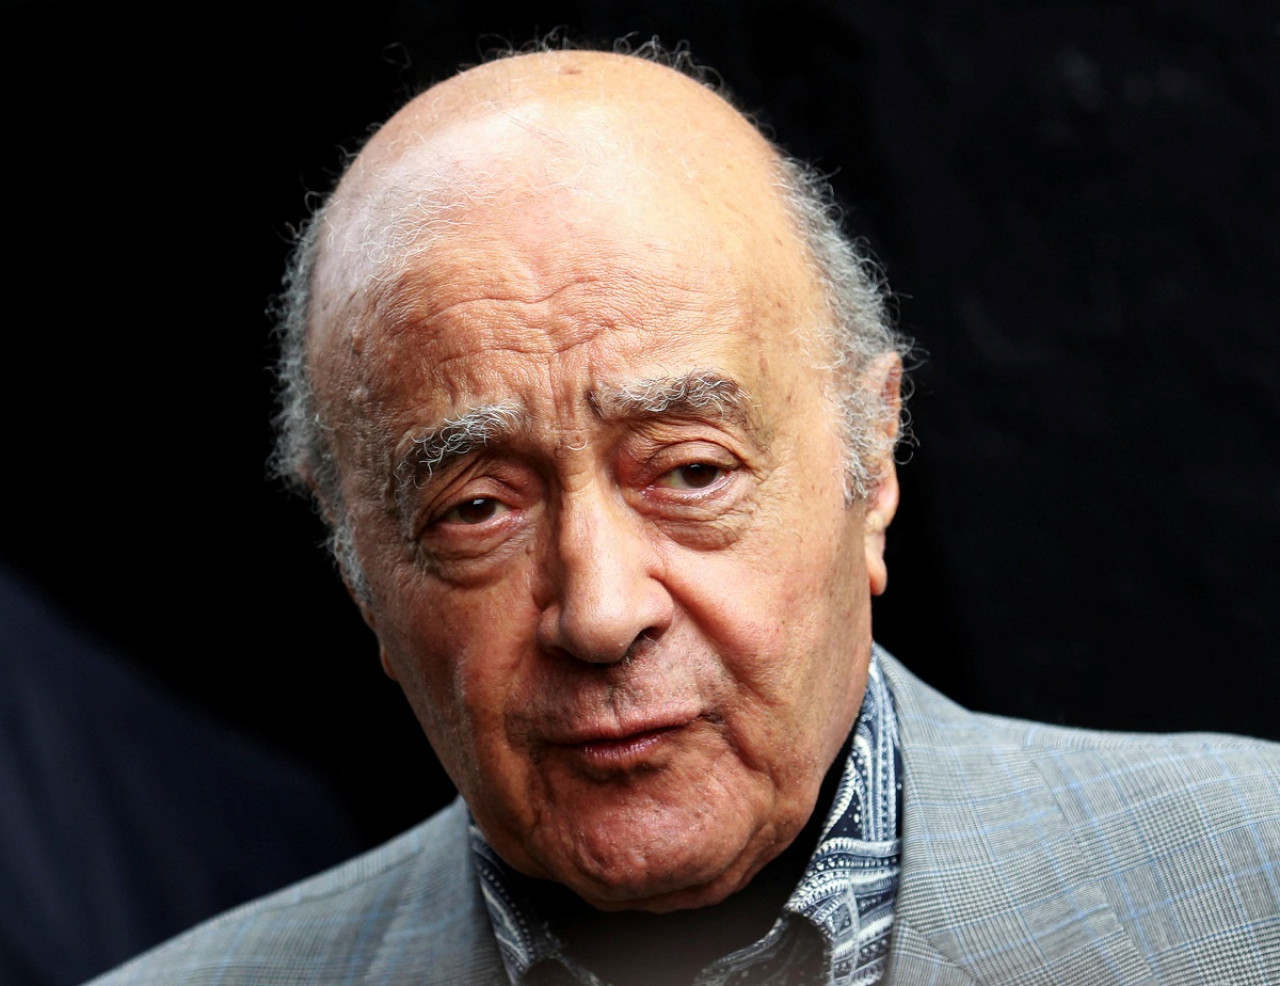 Mohamed Al-Fayed adquirió con sus hermanos la firma House of Fraser. Foto: Reuters.